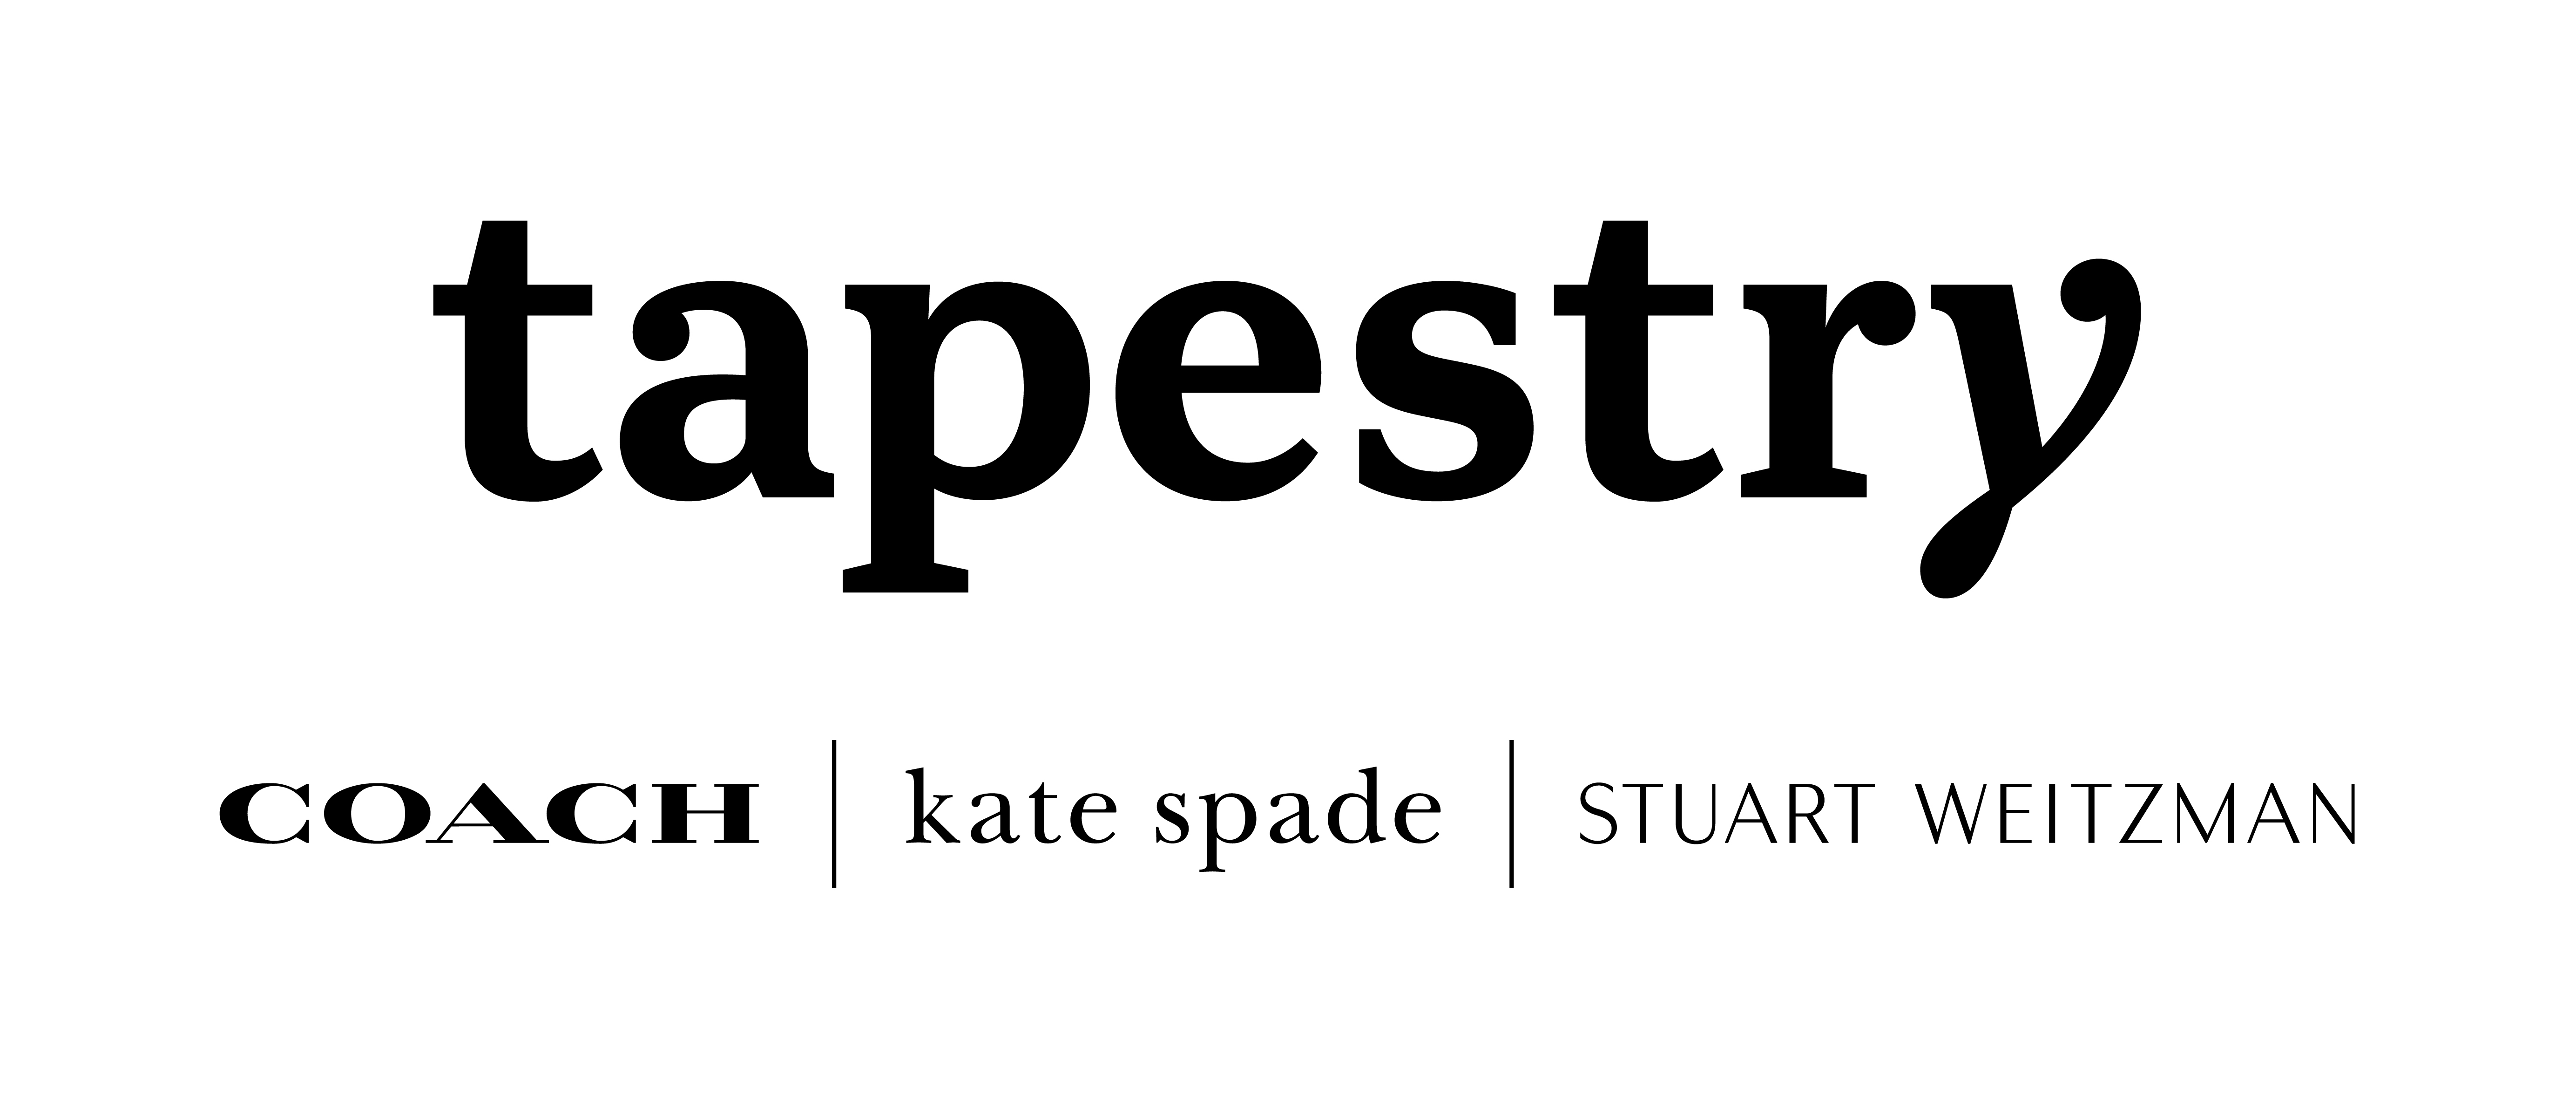 Tapestry and Its Brands - Coach, Kate Spade and Stuart Weitzman - Bring the  Fashion Industry Together to Sign Open to All Pledge